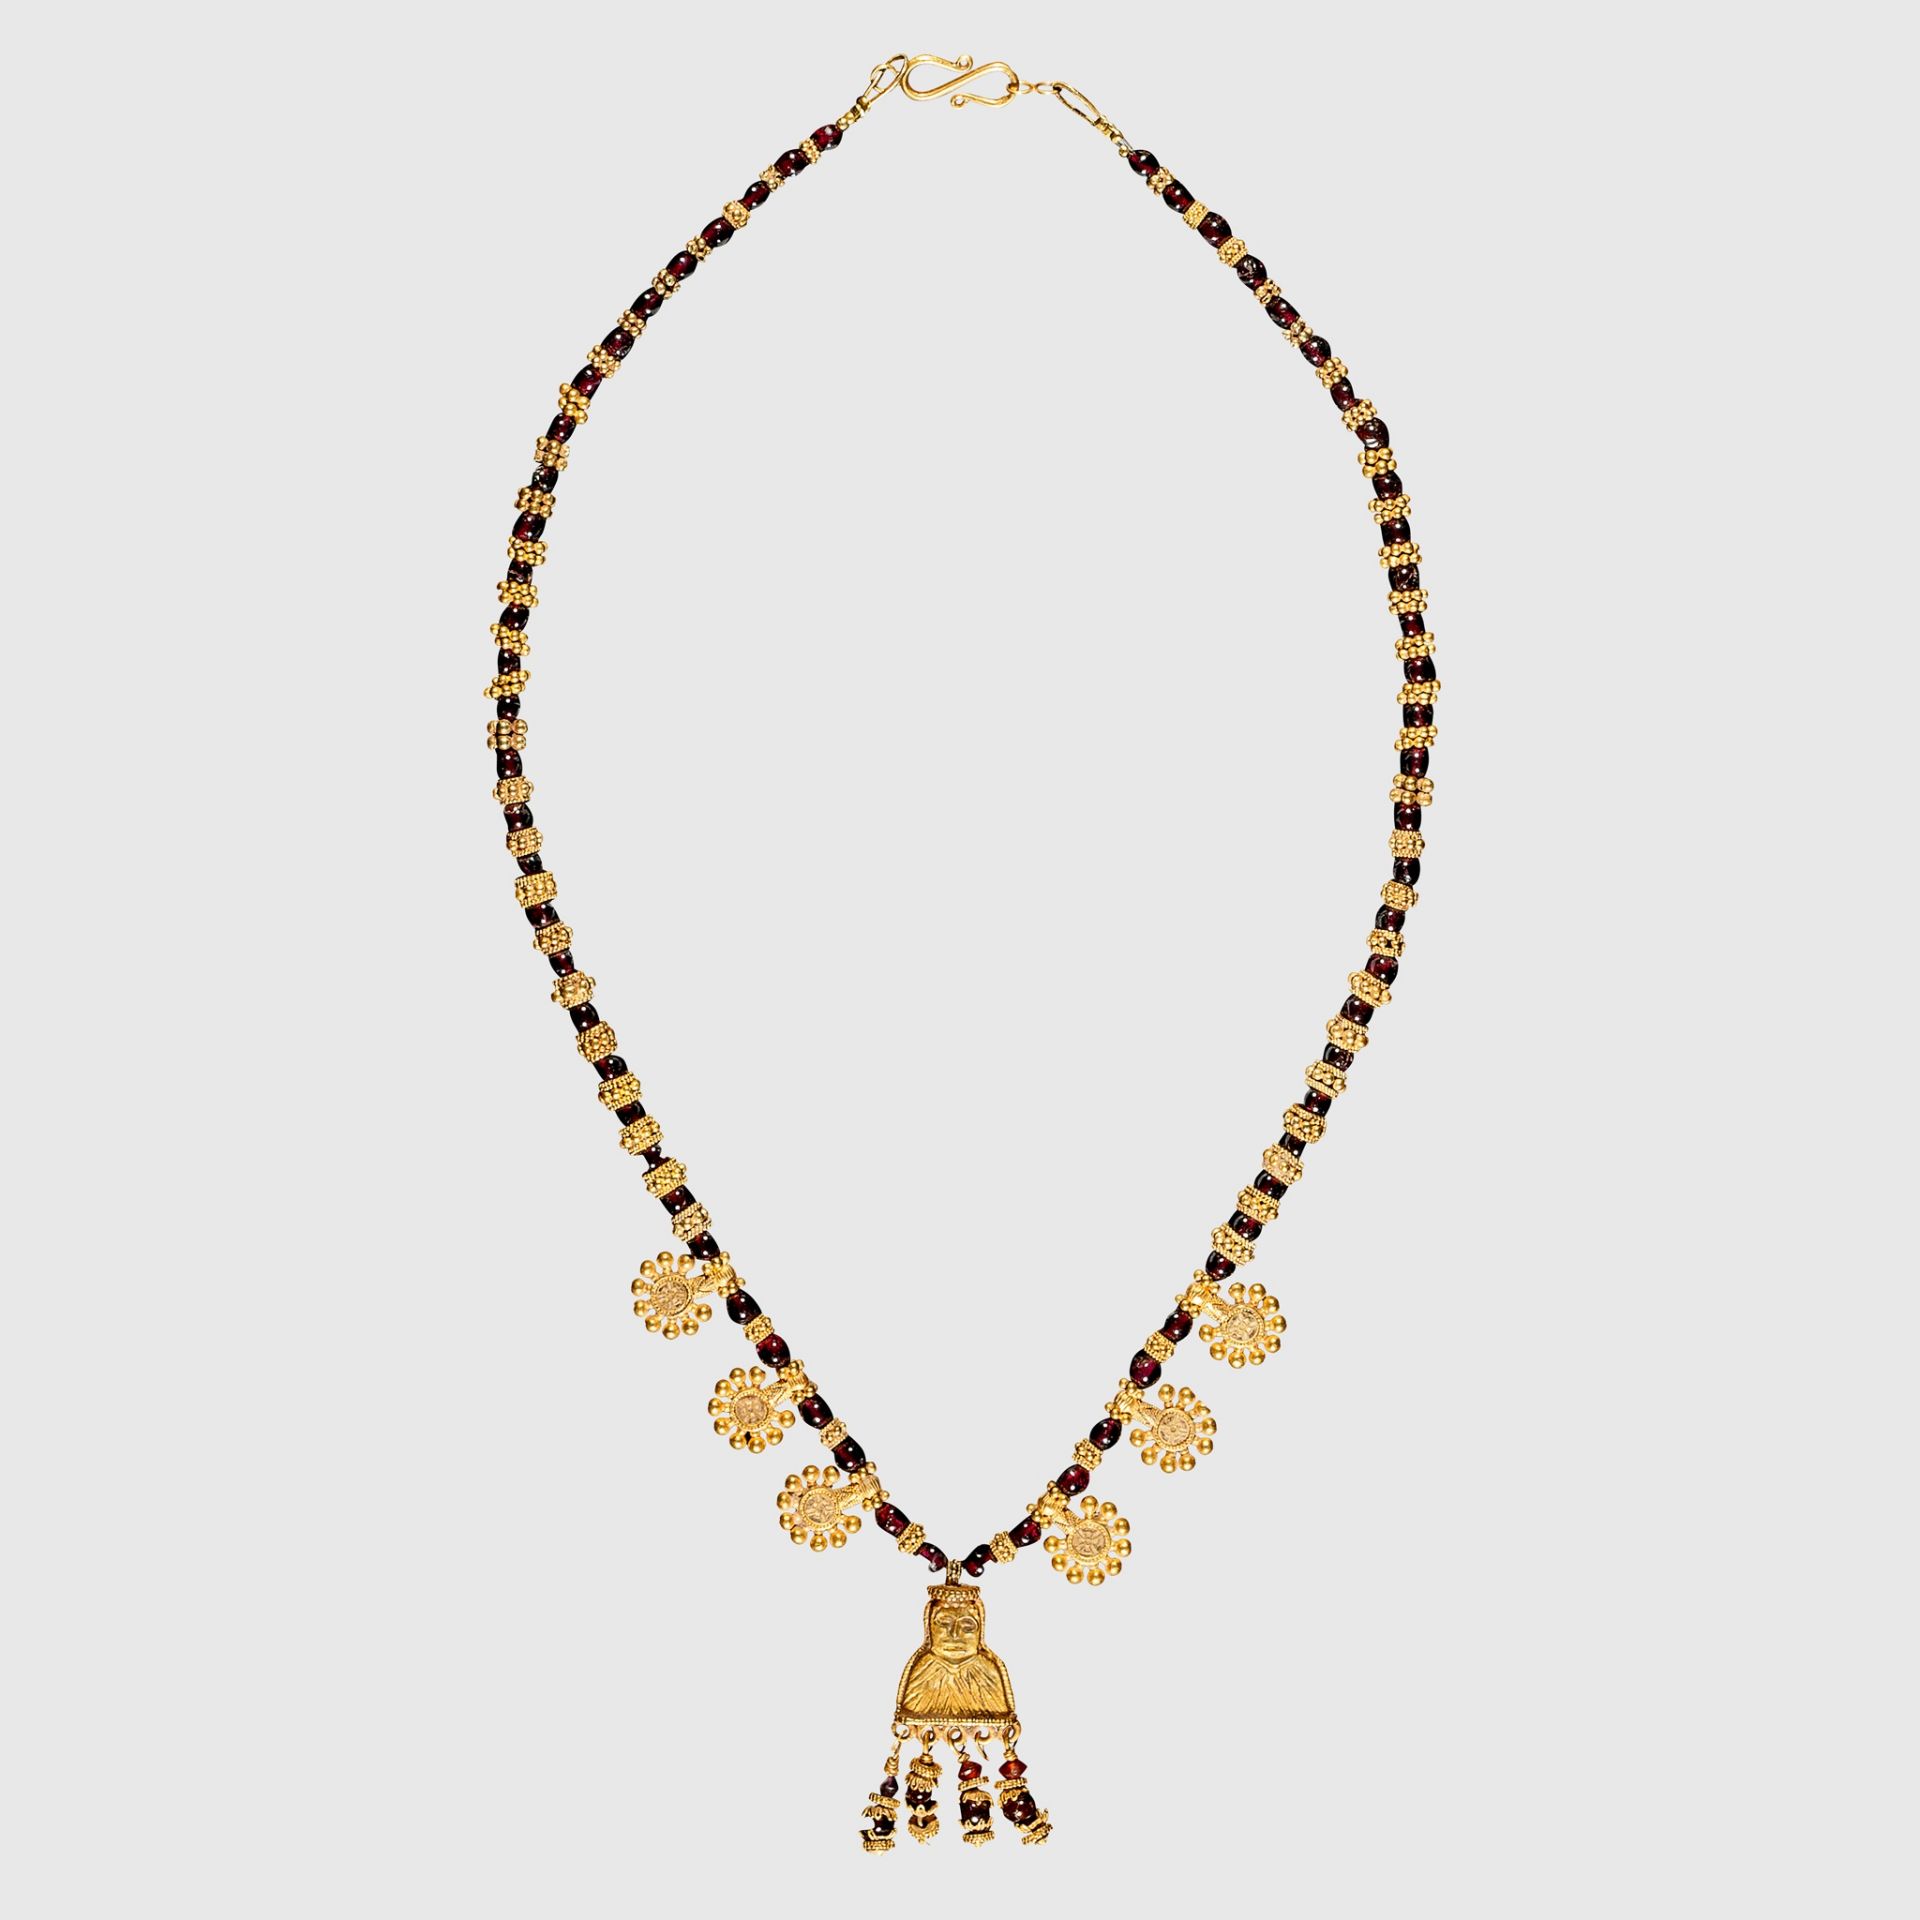 ANCIENT ARABIAN GOLD NECKLACE WITH FEMALE FIGURE PENDANT, LIKELY SABEAN SOUTHERN ARABIA, C. 5TH -